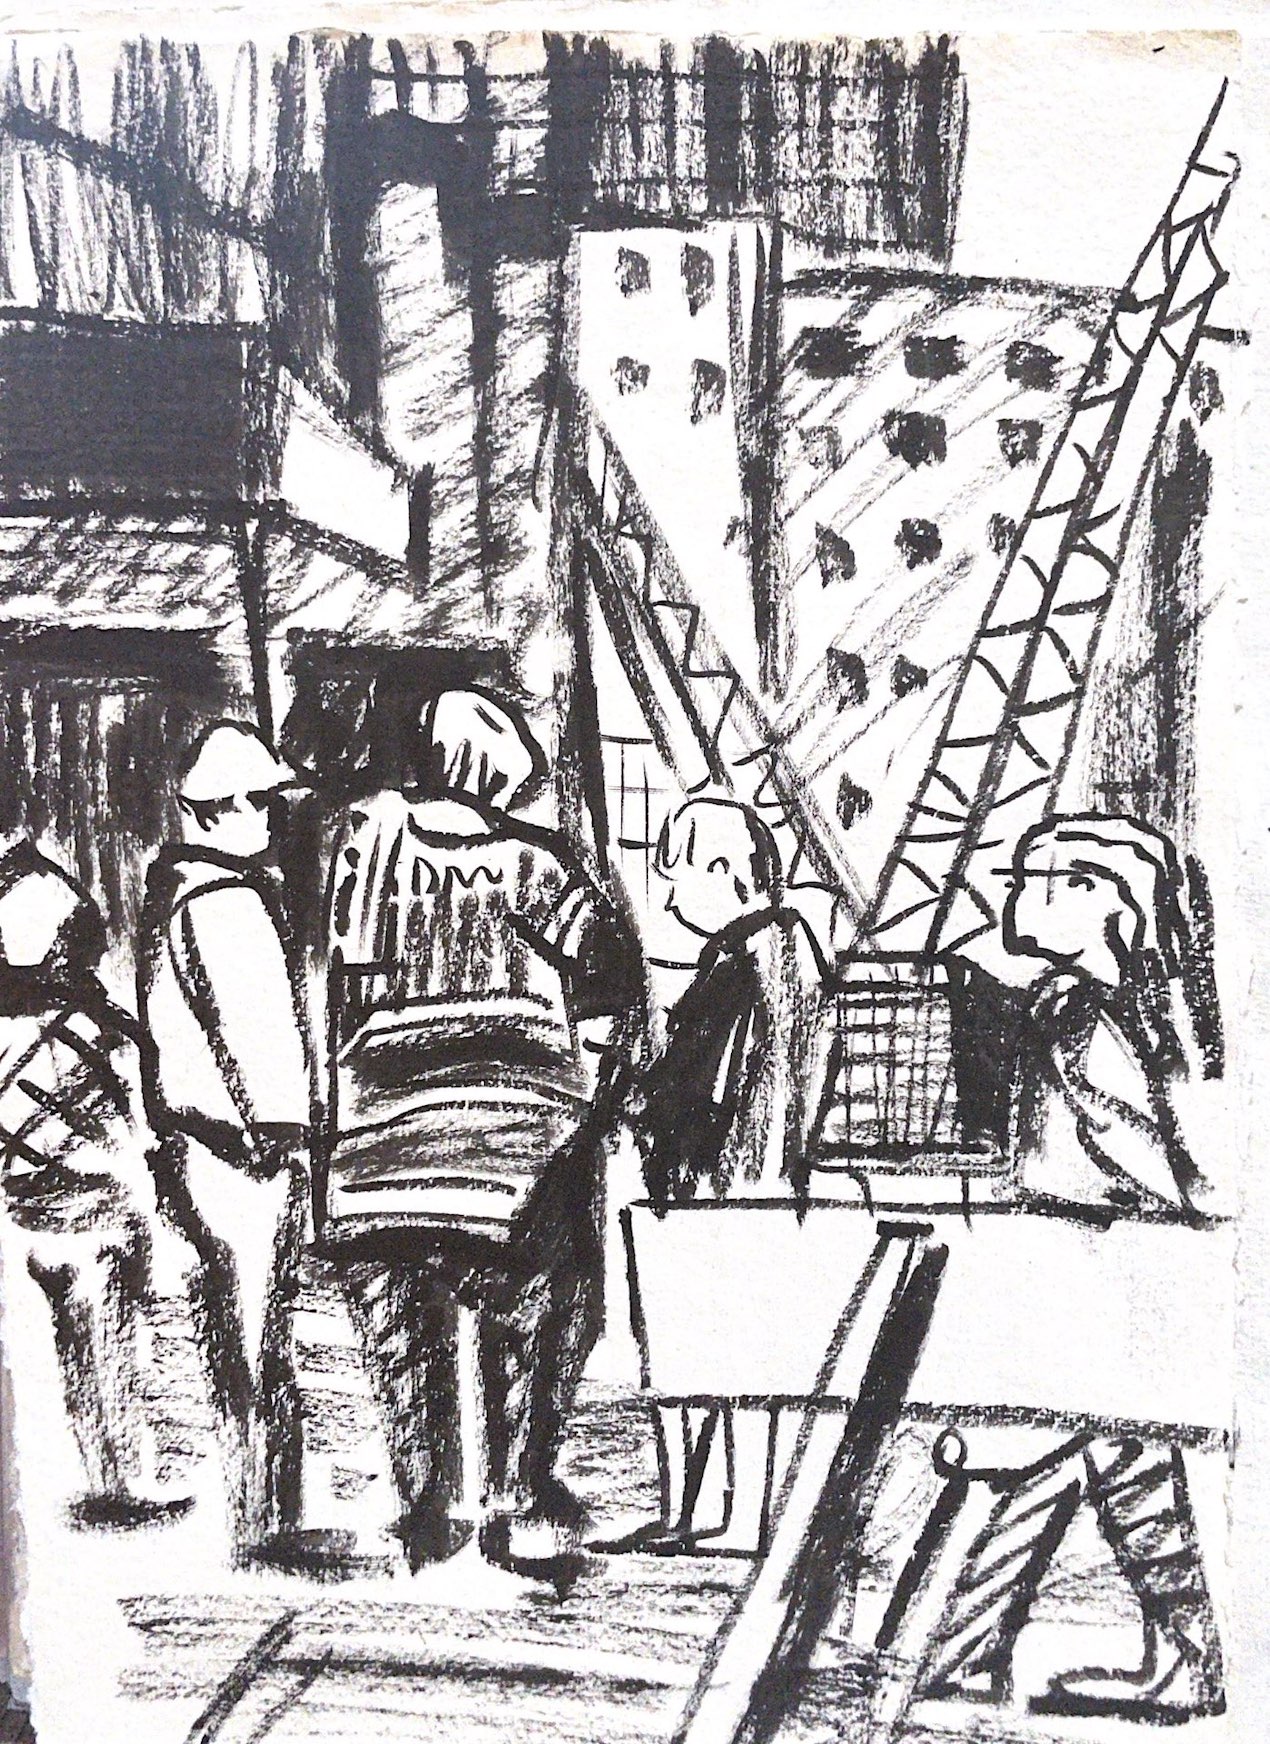 Ink drawing shows rescue and recovery efforts at Ground Zero